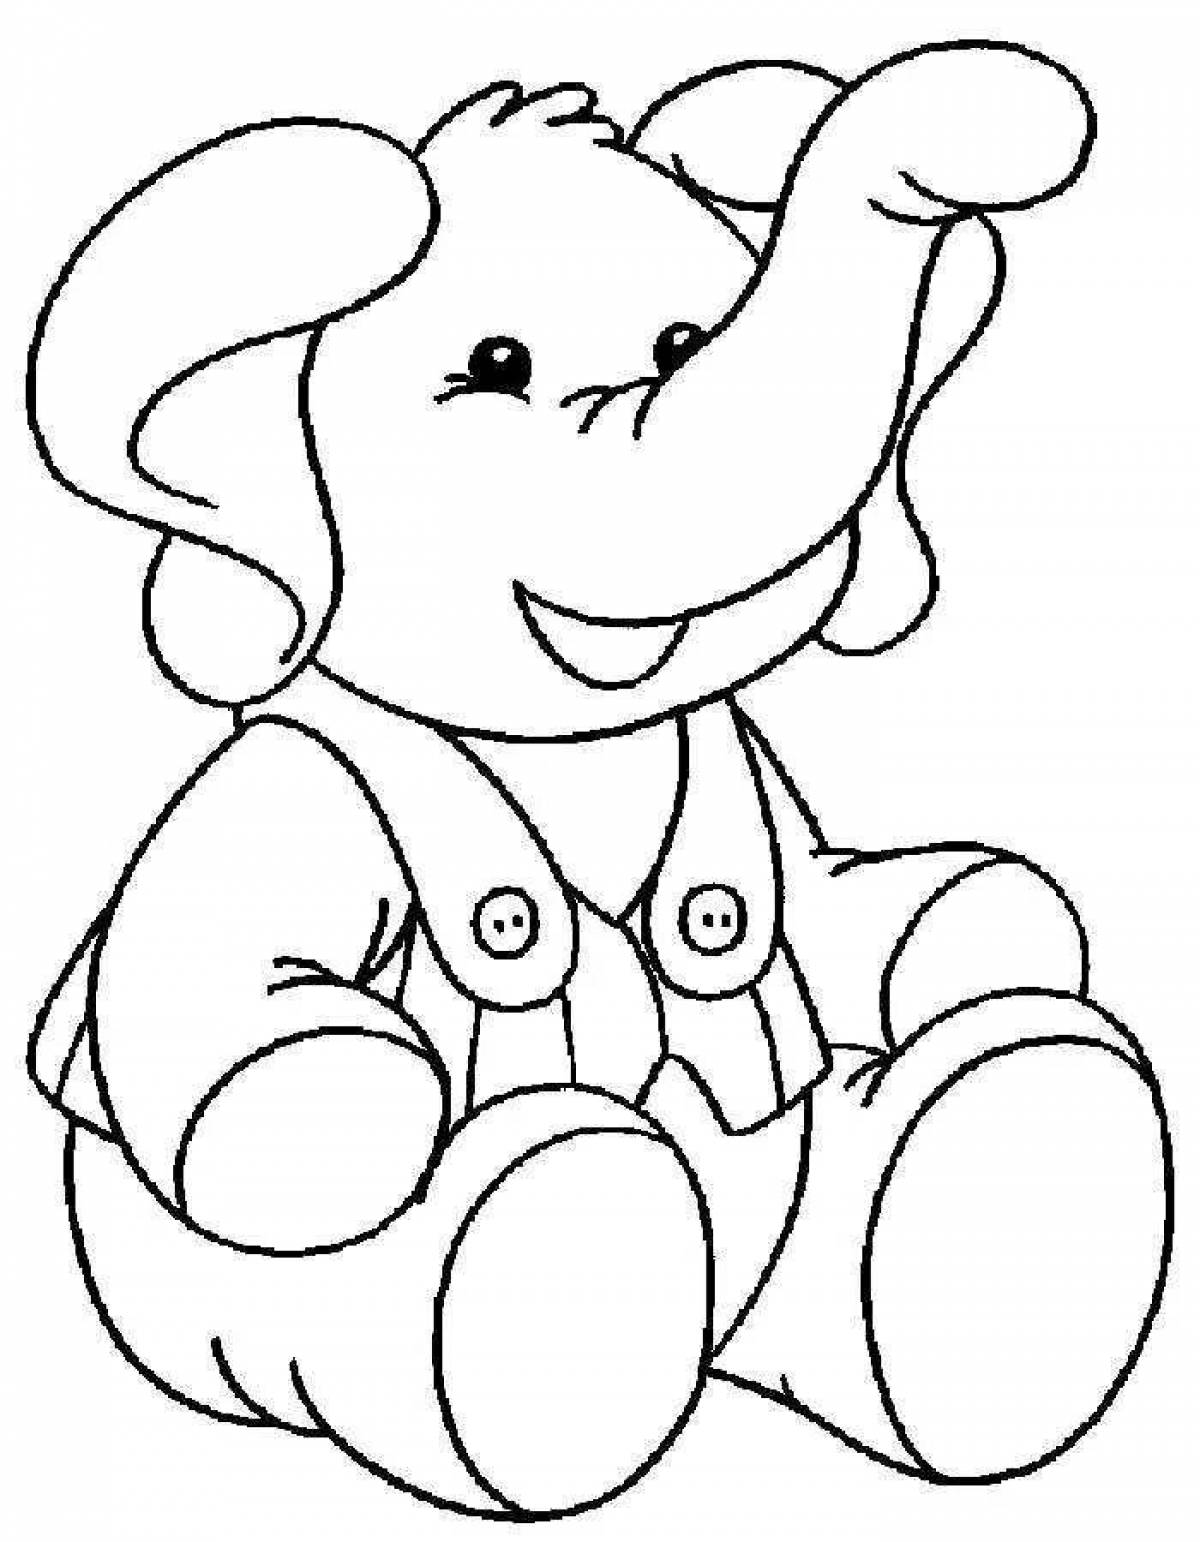 Coloring book for kids #7